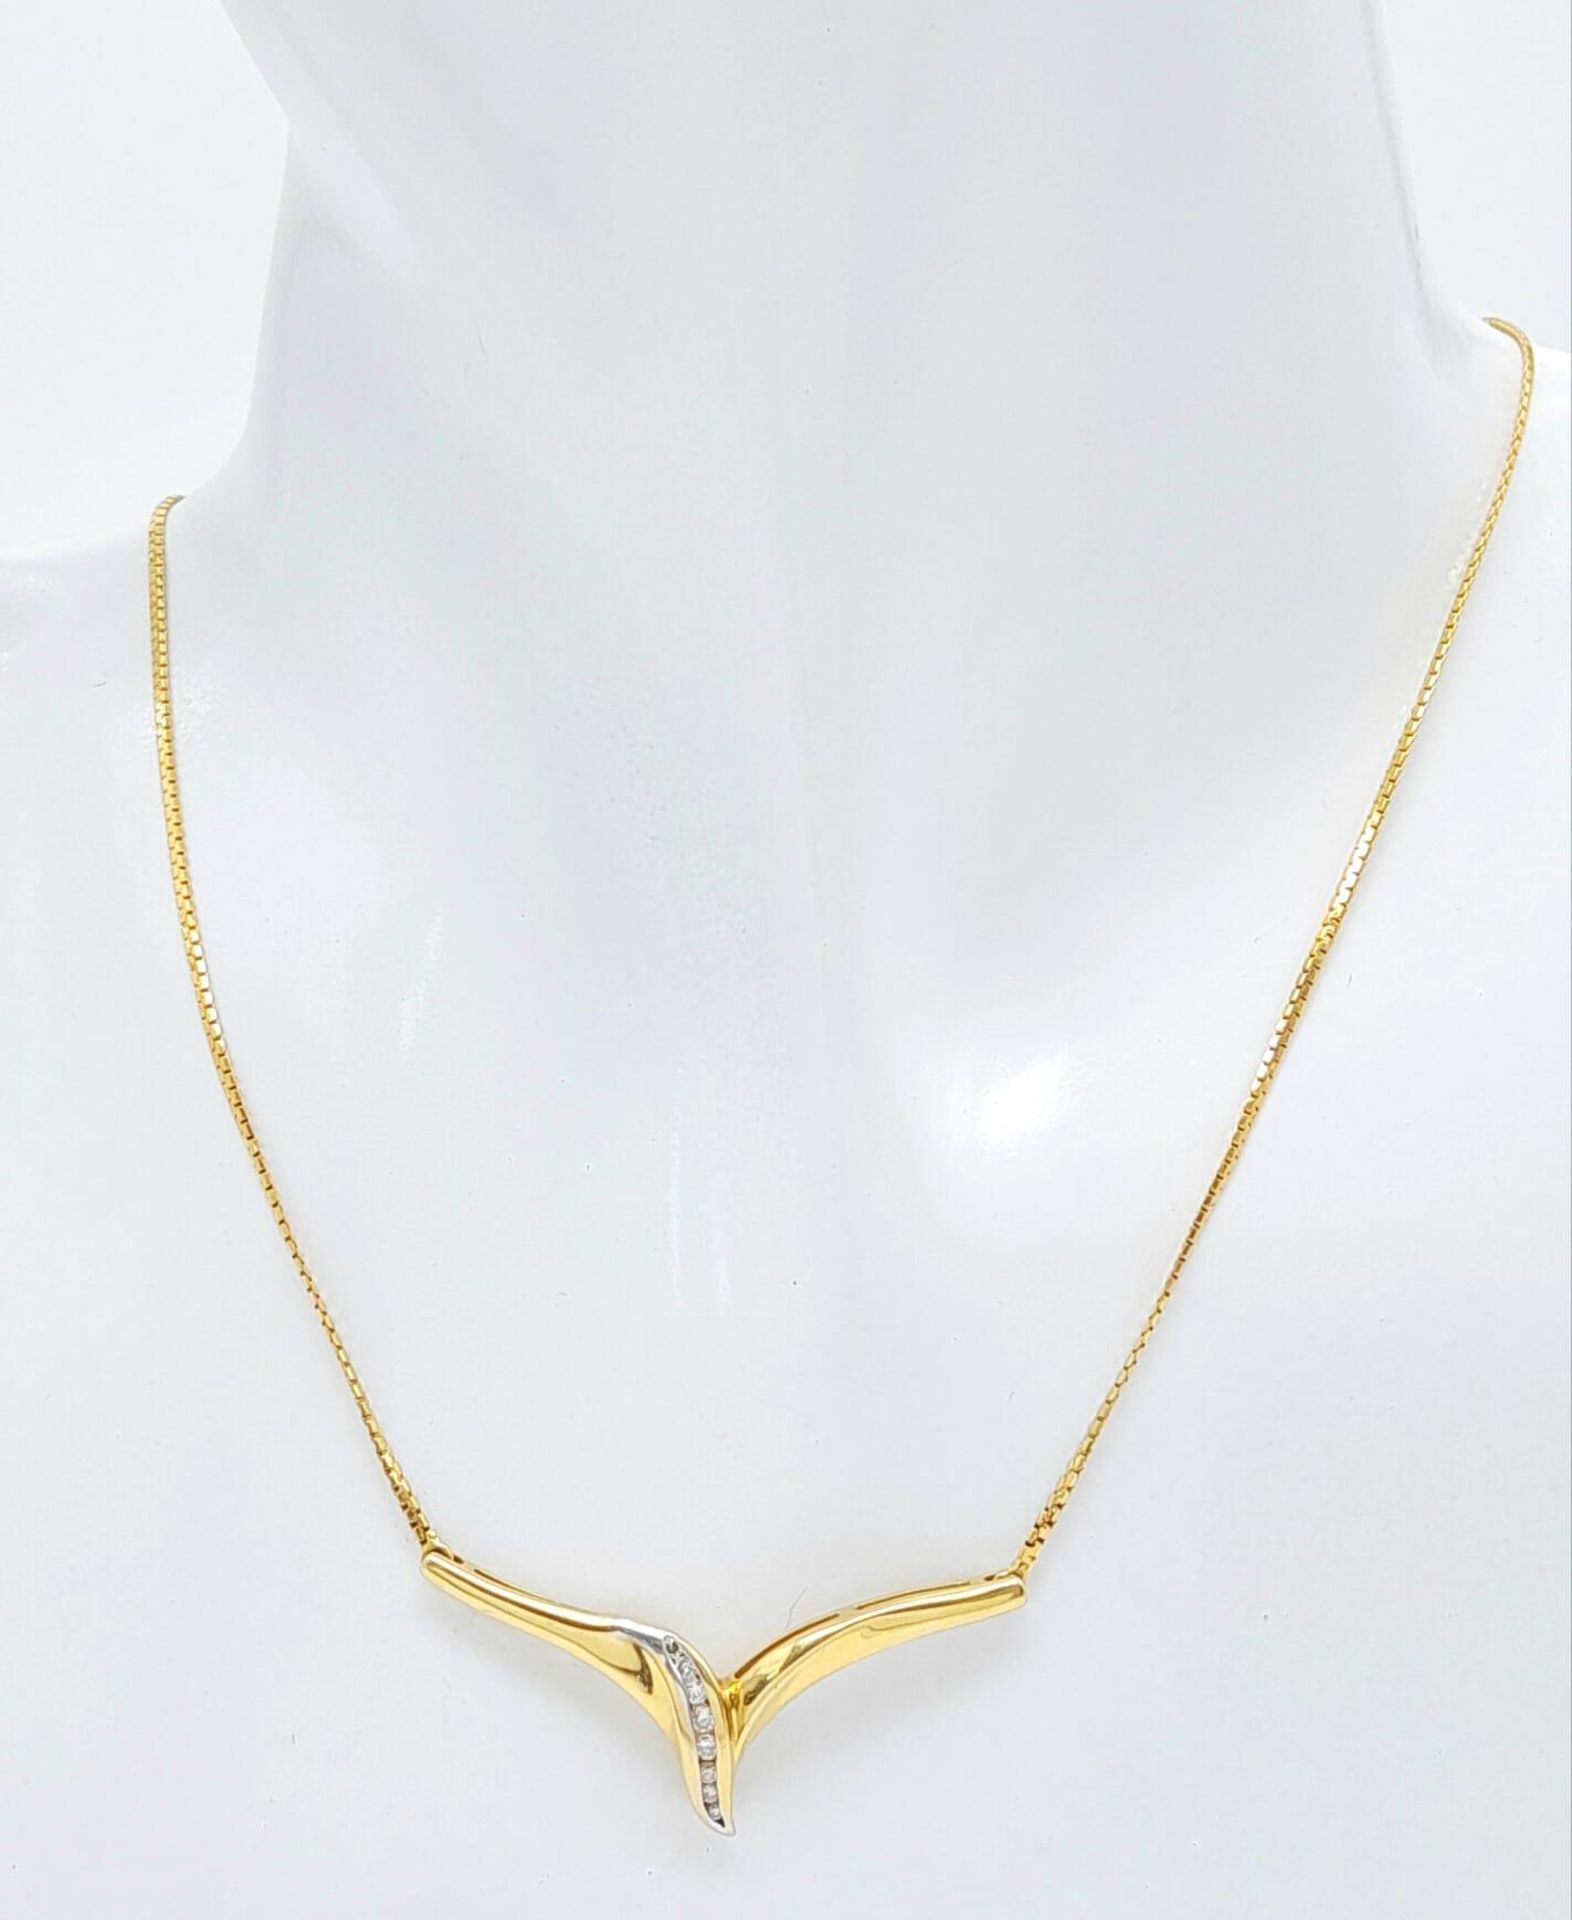 An 18K Yellow Gold Necklace with Attached 18K and Diamond Chevron Pendant. 40cm. 6.3g